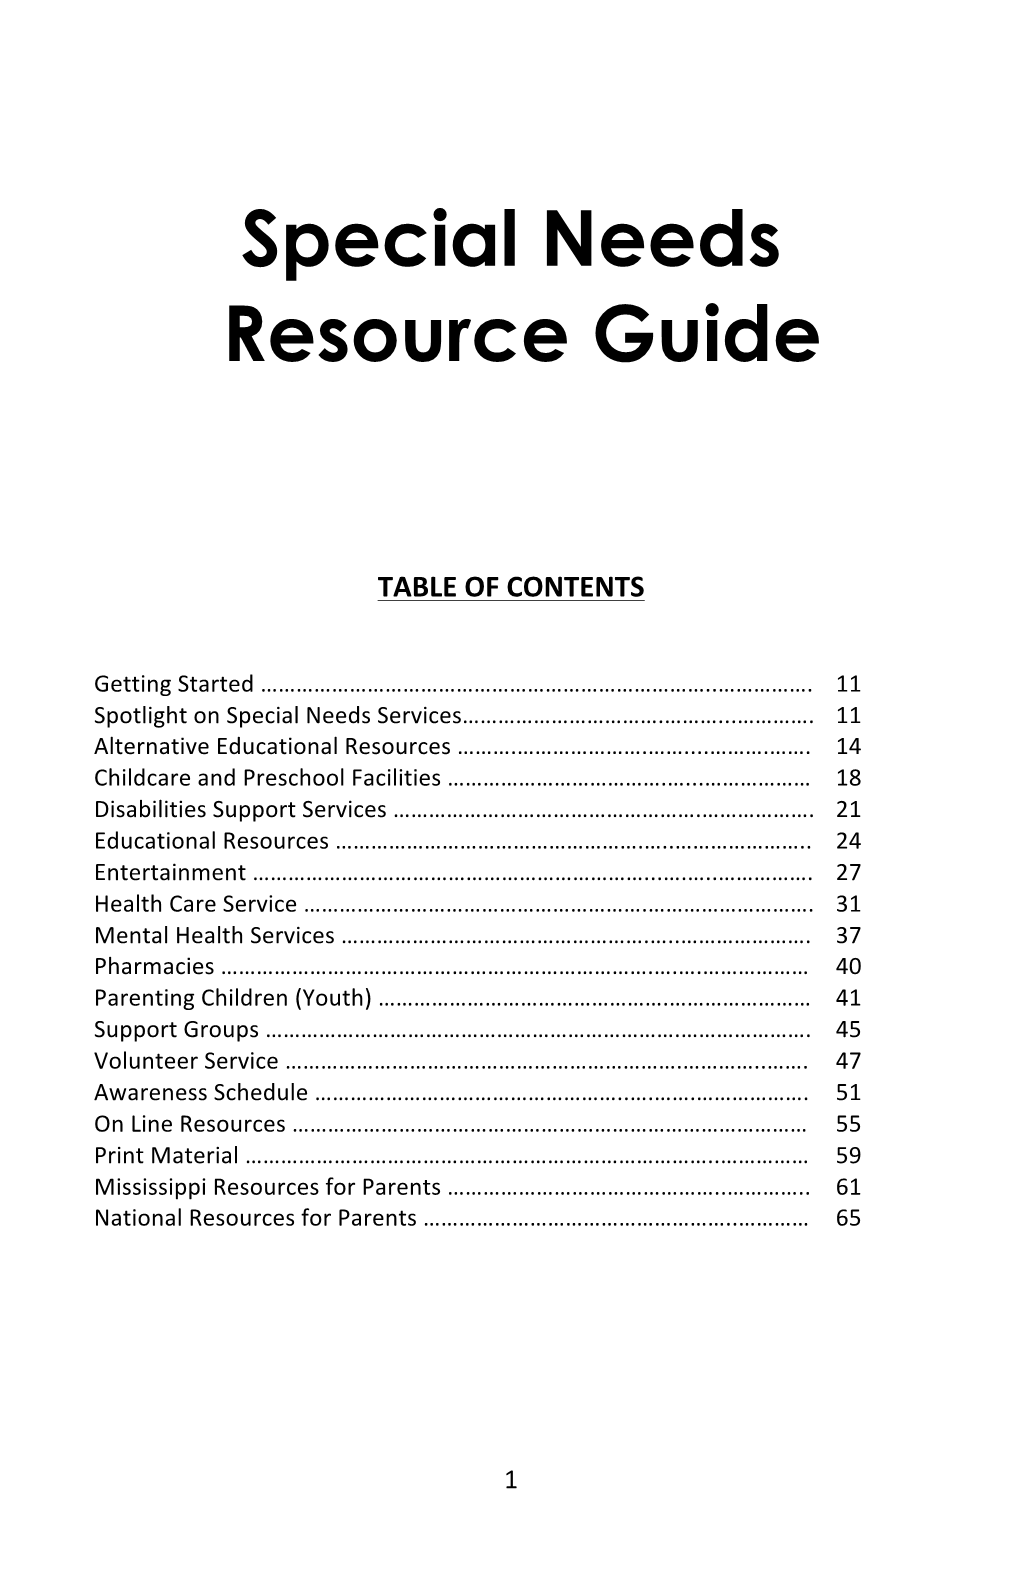 Special Needs Resource Guide